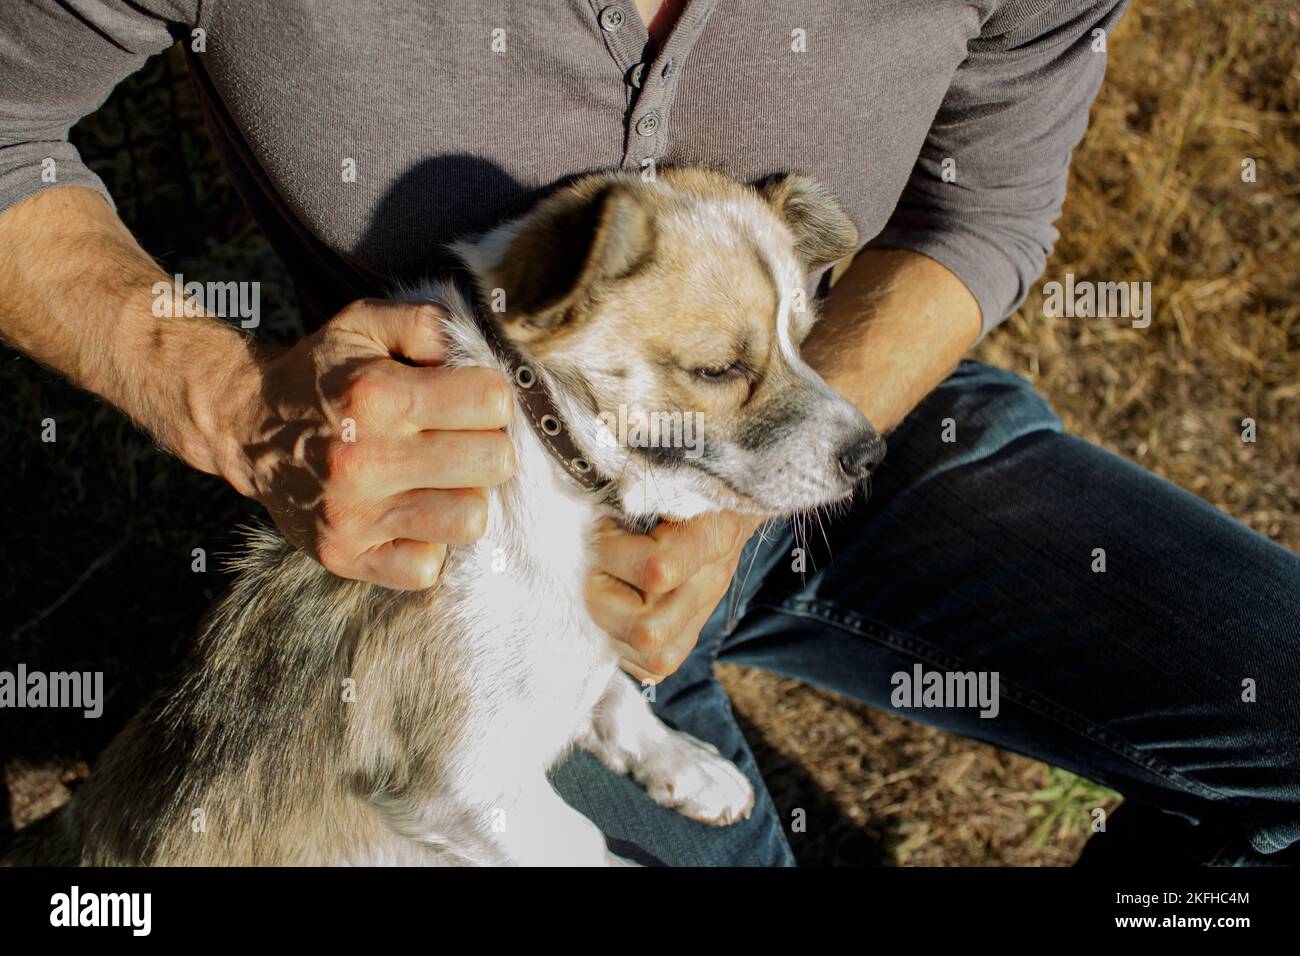 The dog is unwilling. The man hurts the dog. Animal rights. Stock Photo